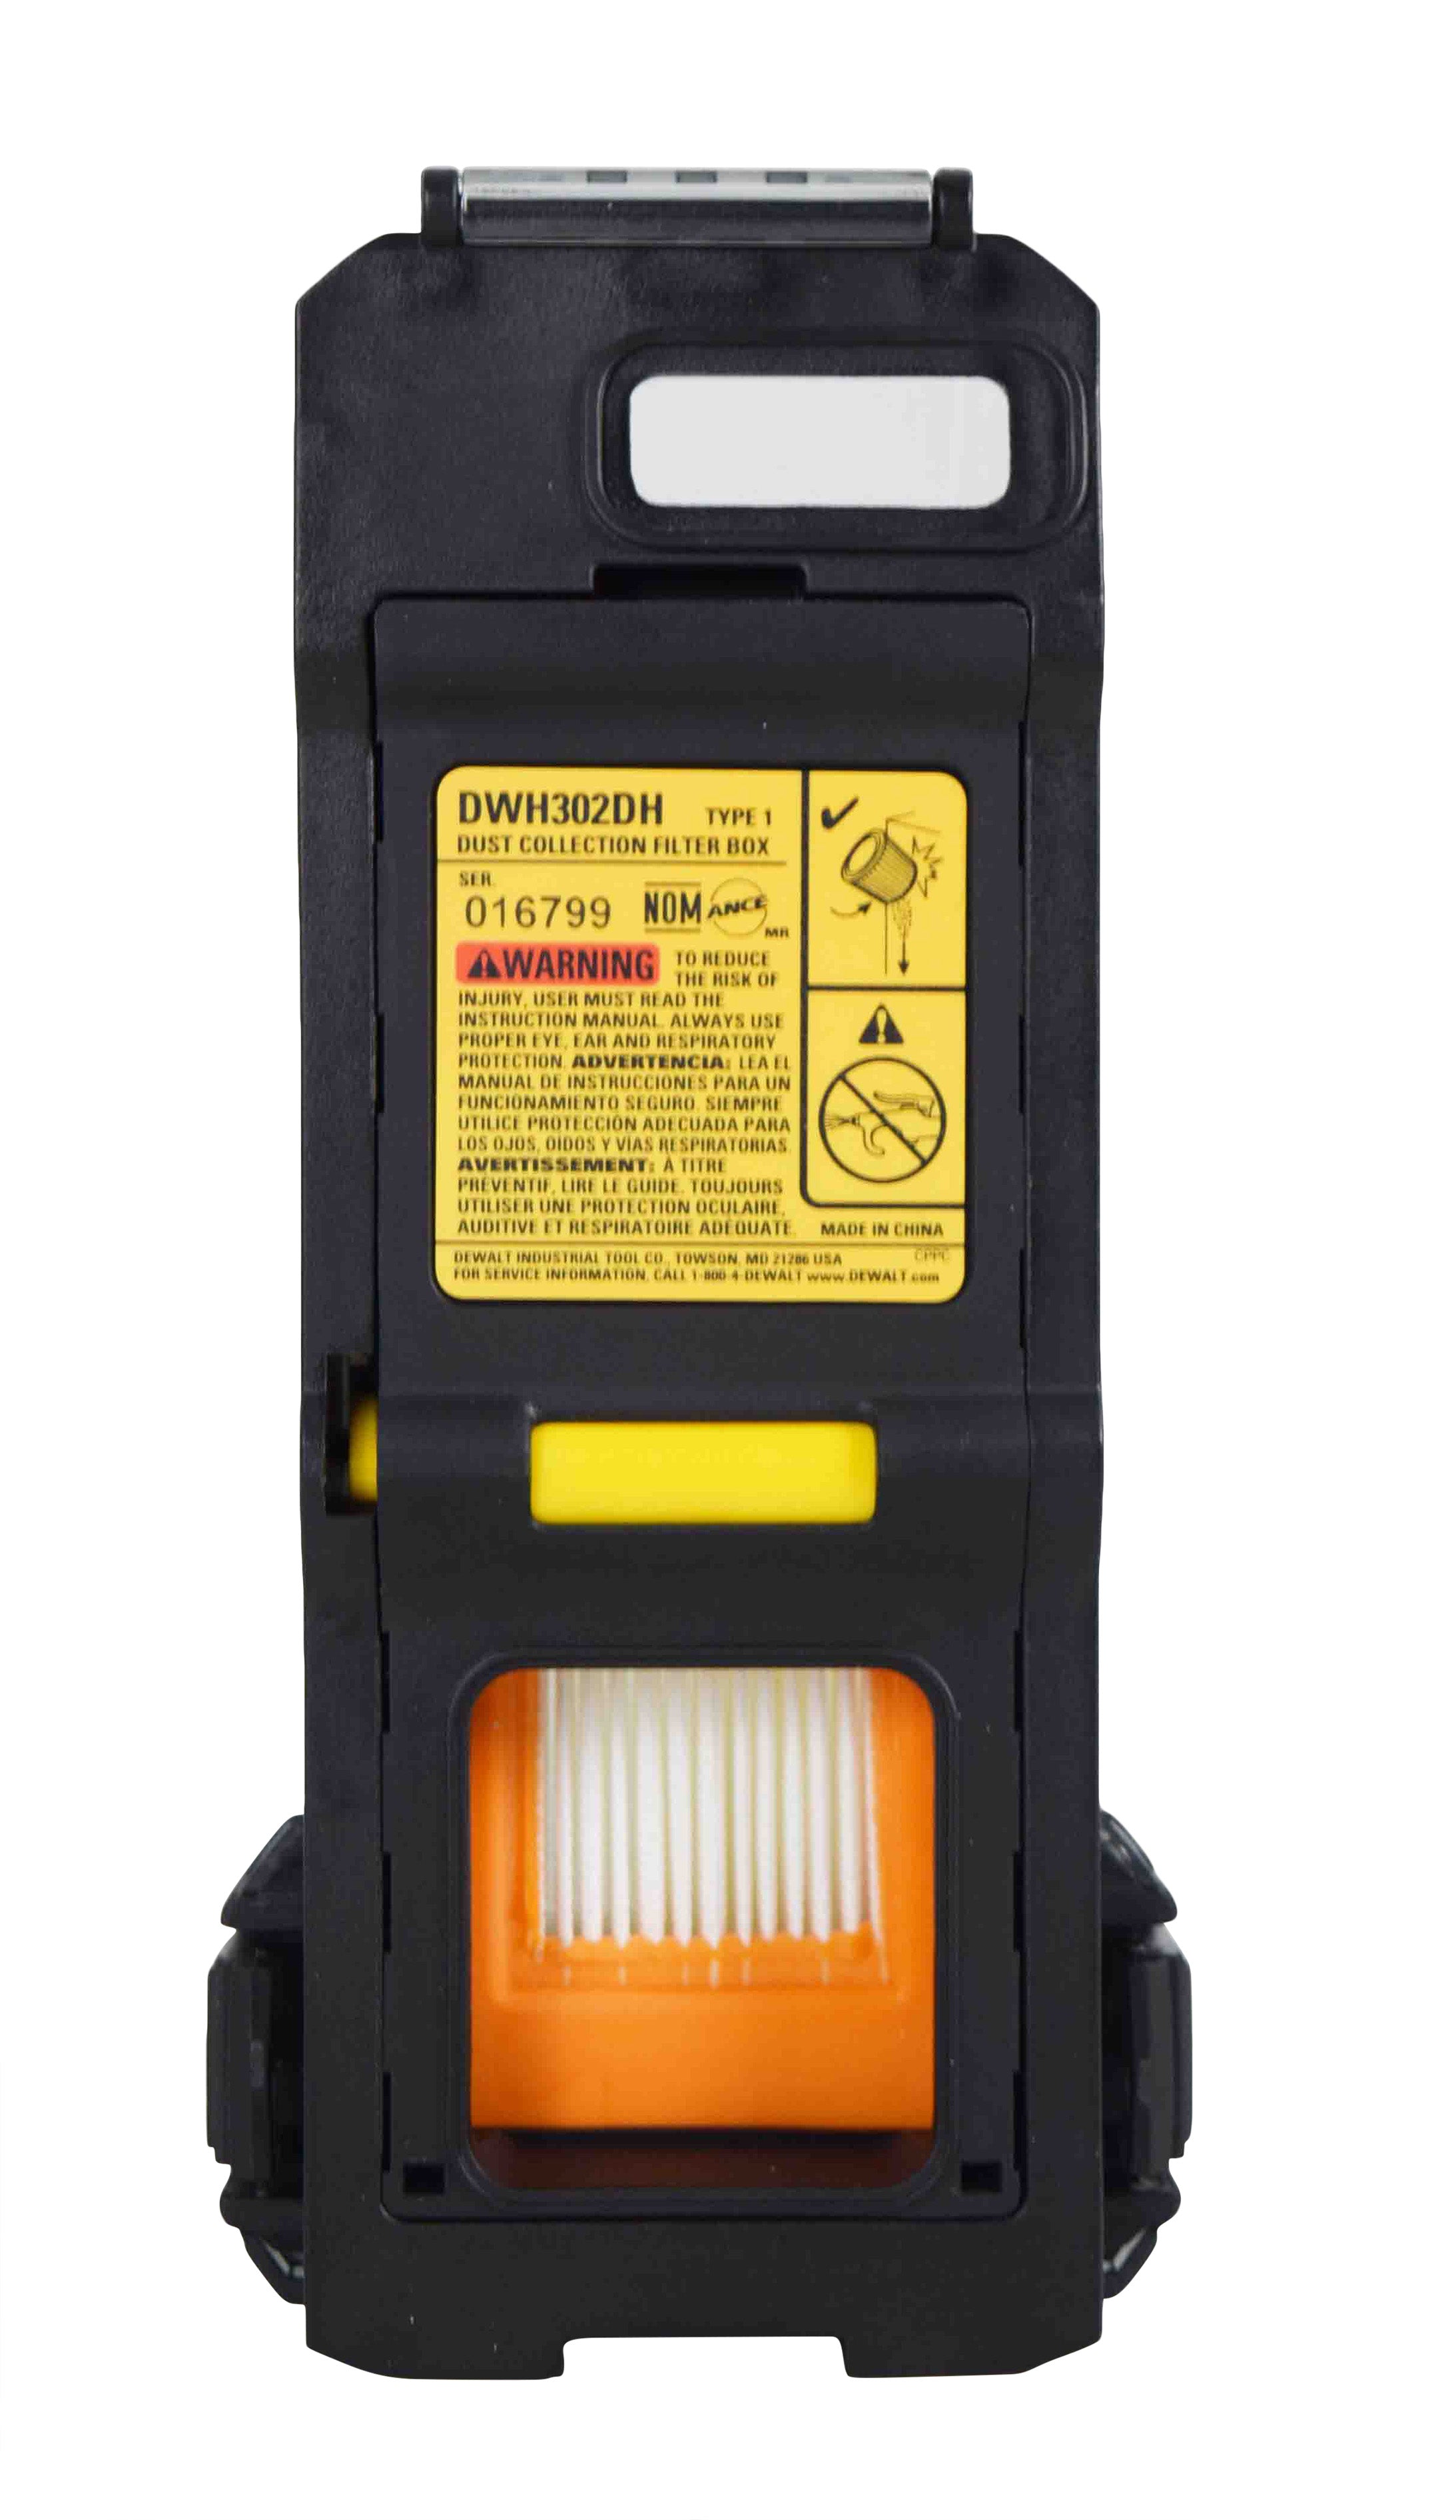 DeWalt DWH302DH Replacement Dust Extractor Dust Box for DWH303DH, DWH304DH